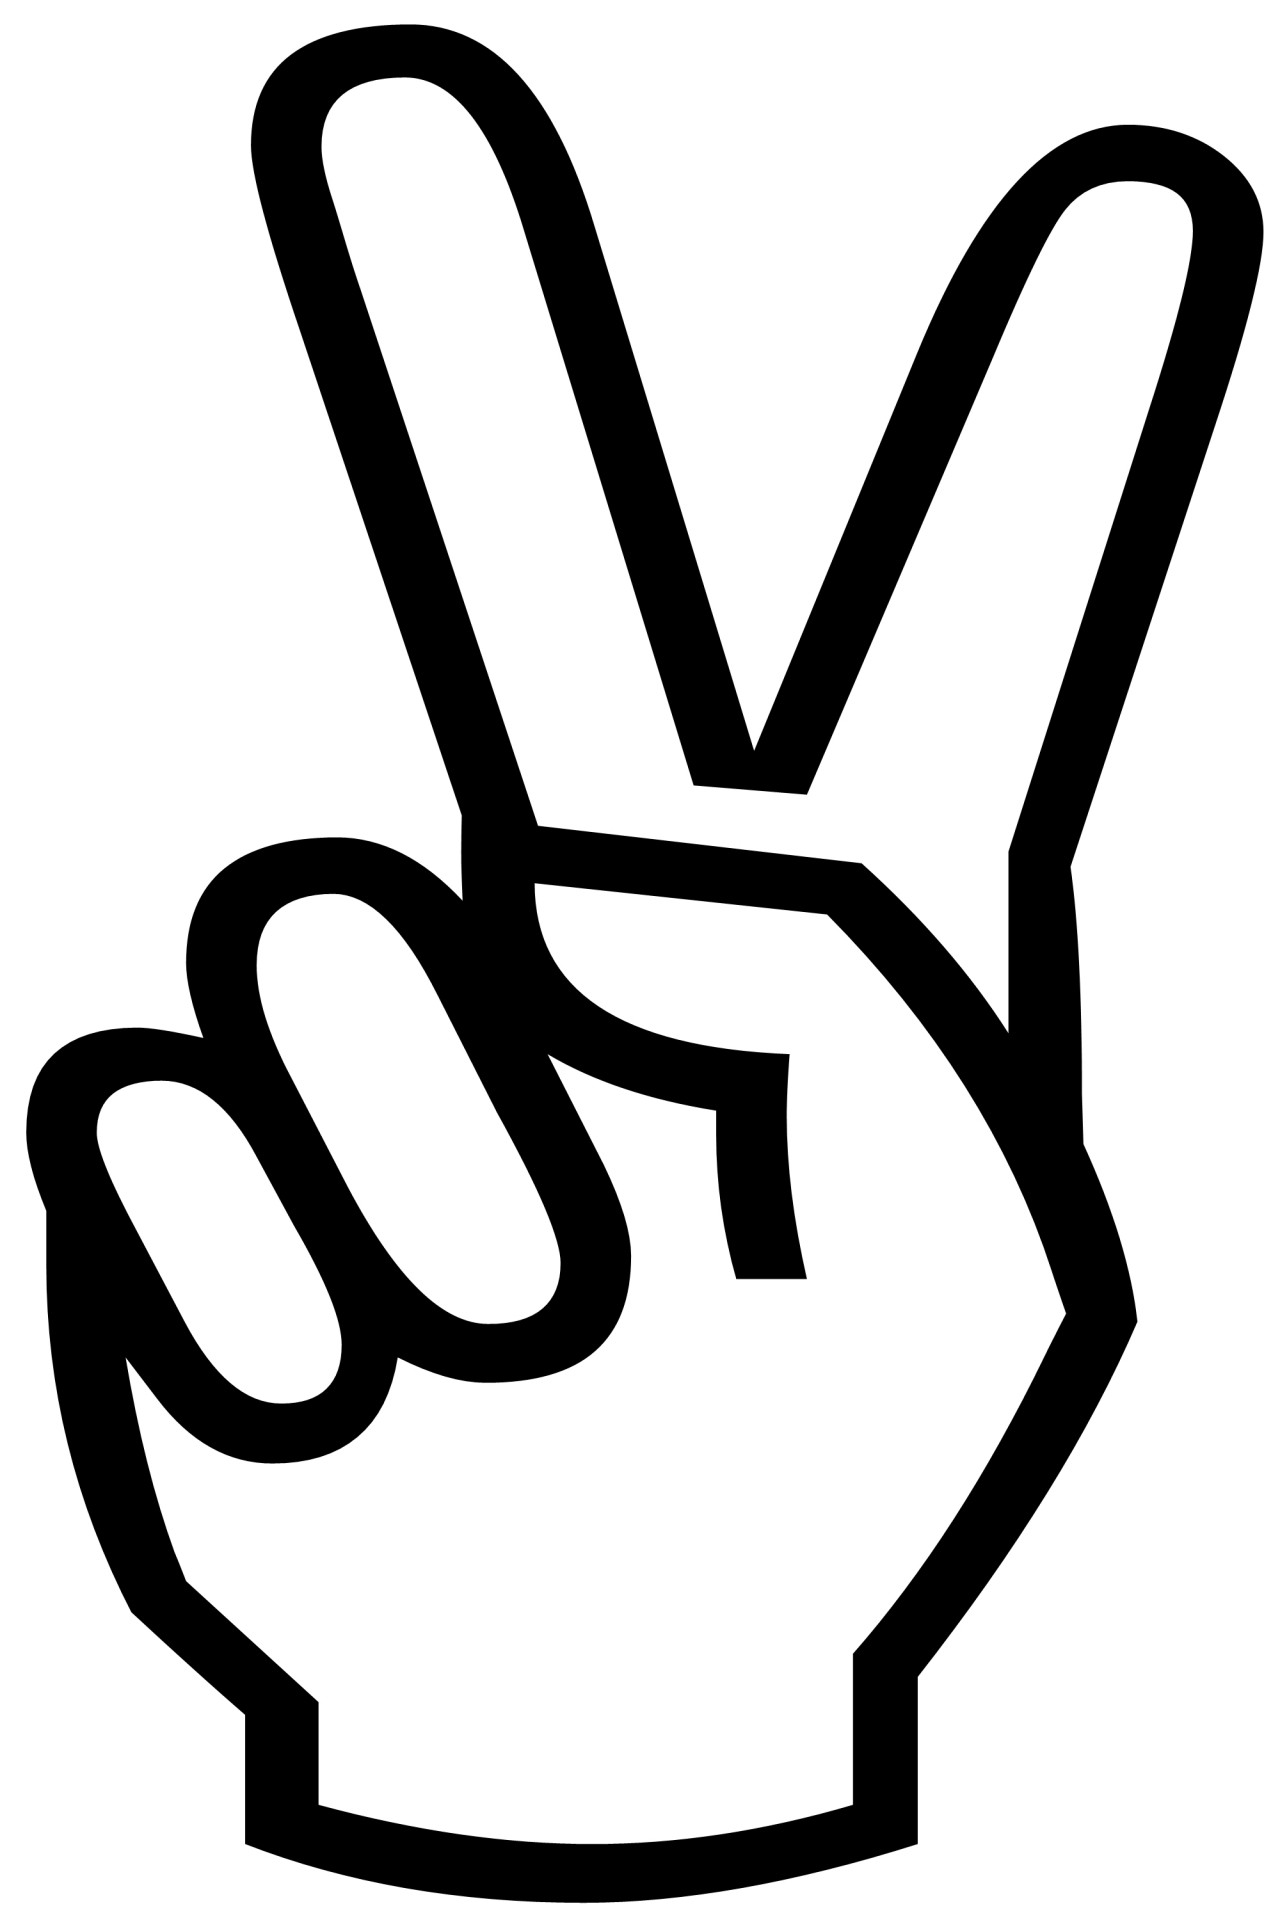 Image result for peace out sign